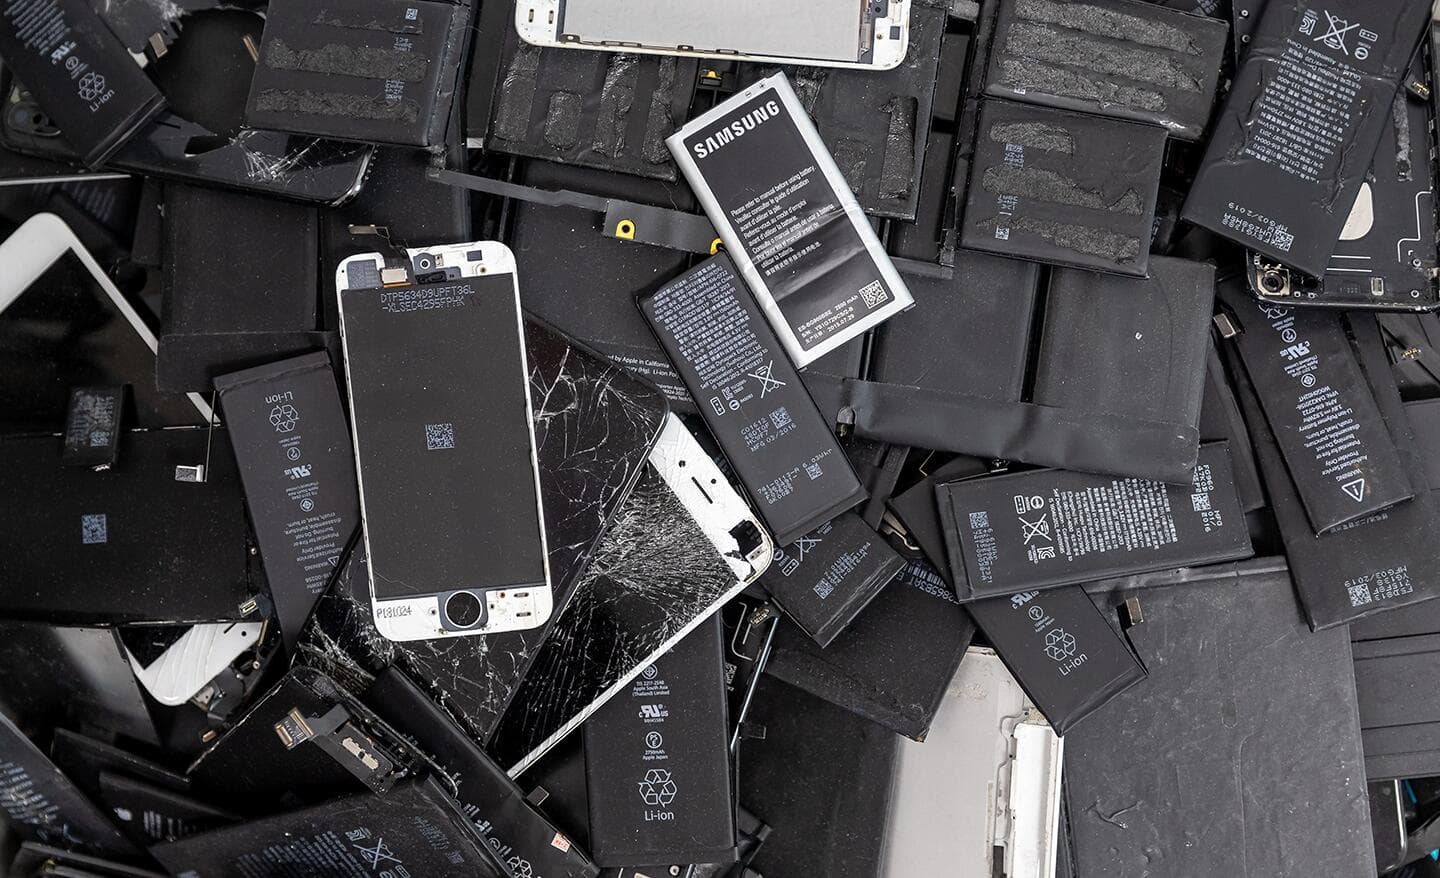 Old and broken laptop batteries, cell phone batteries and phones in a pile.